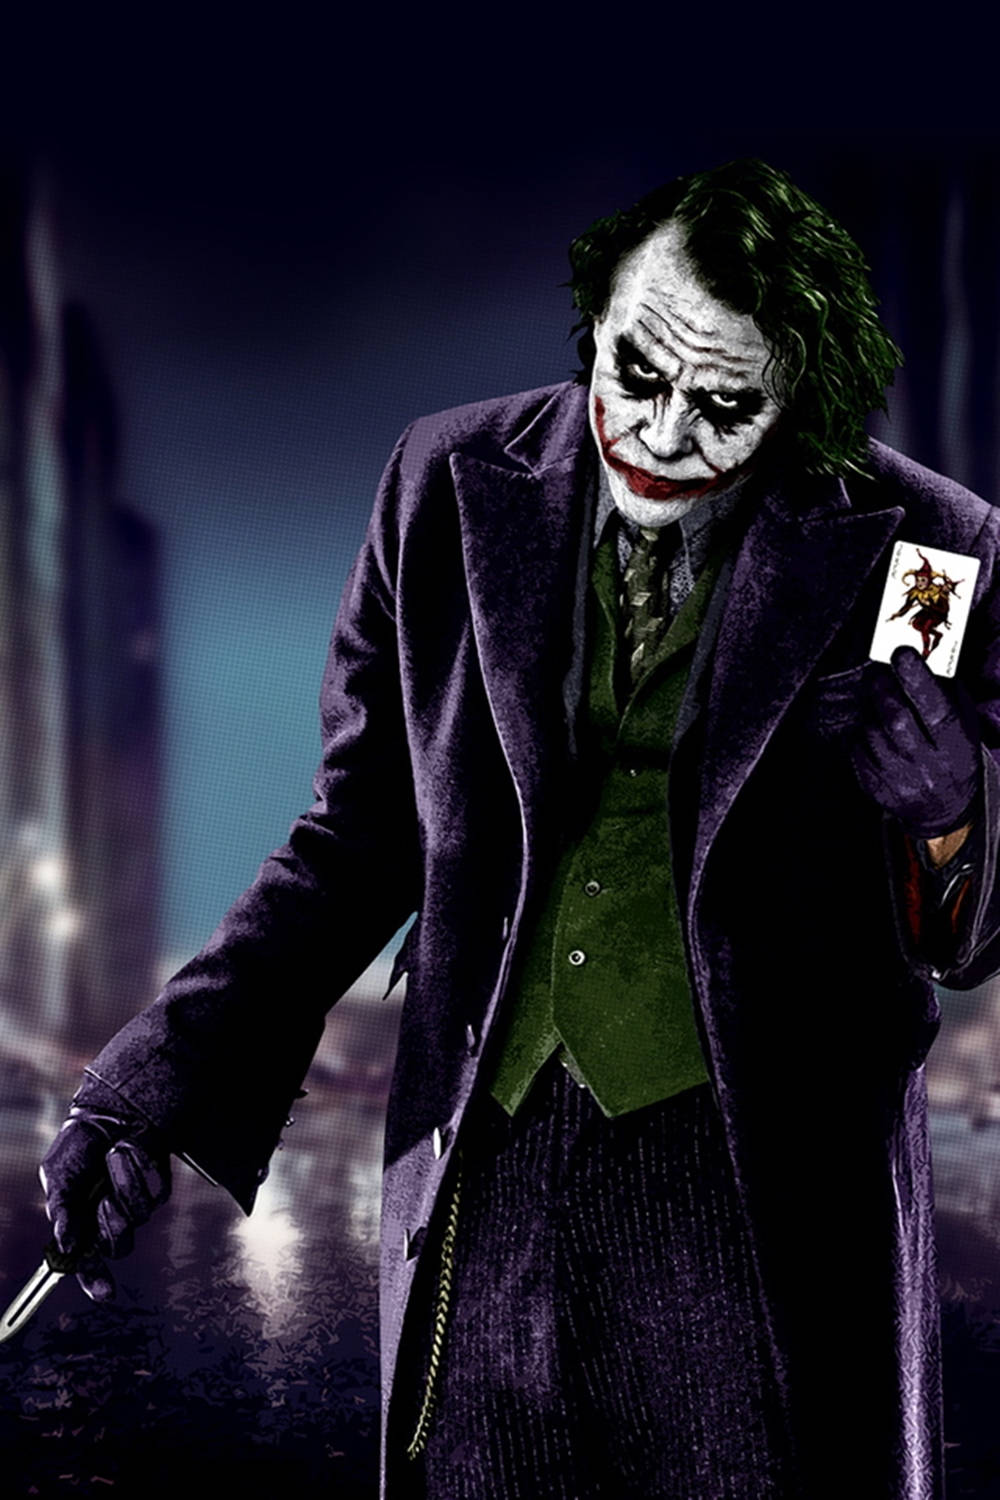 Laugh Out Loud with The Joker in Pubg Wallpaper